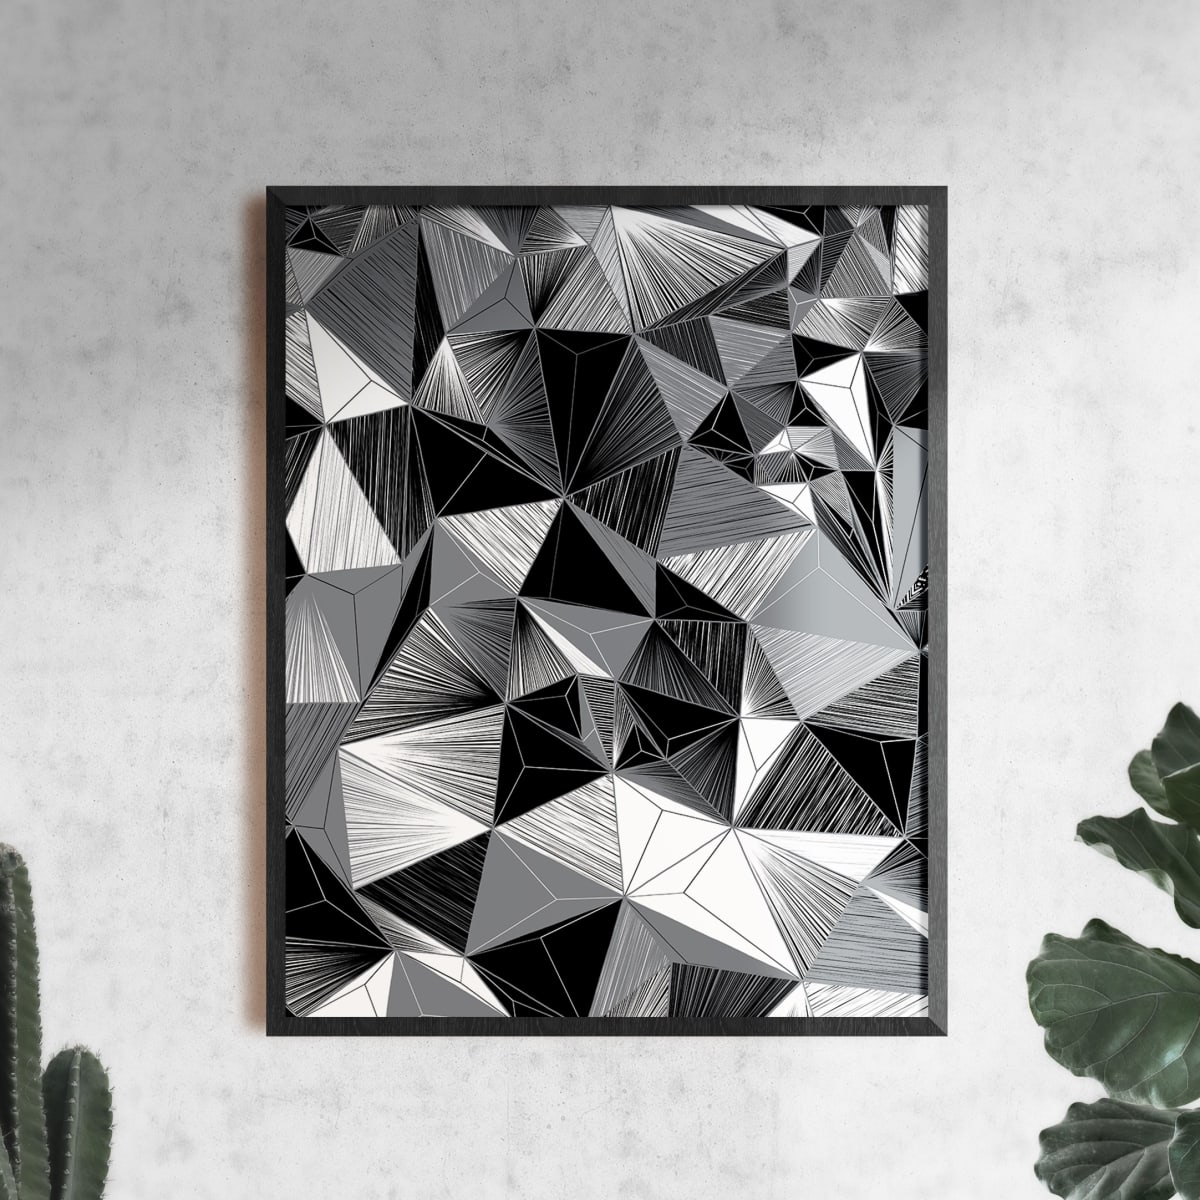 "Conscious Growth 096" Large One-of-a-Kind Print by Debbie Clapper  Image: Conscious Growth Print 096, a black, white, and gray one of a kind archival modern art print